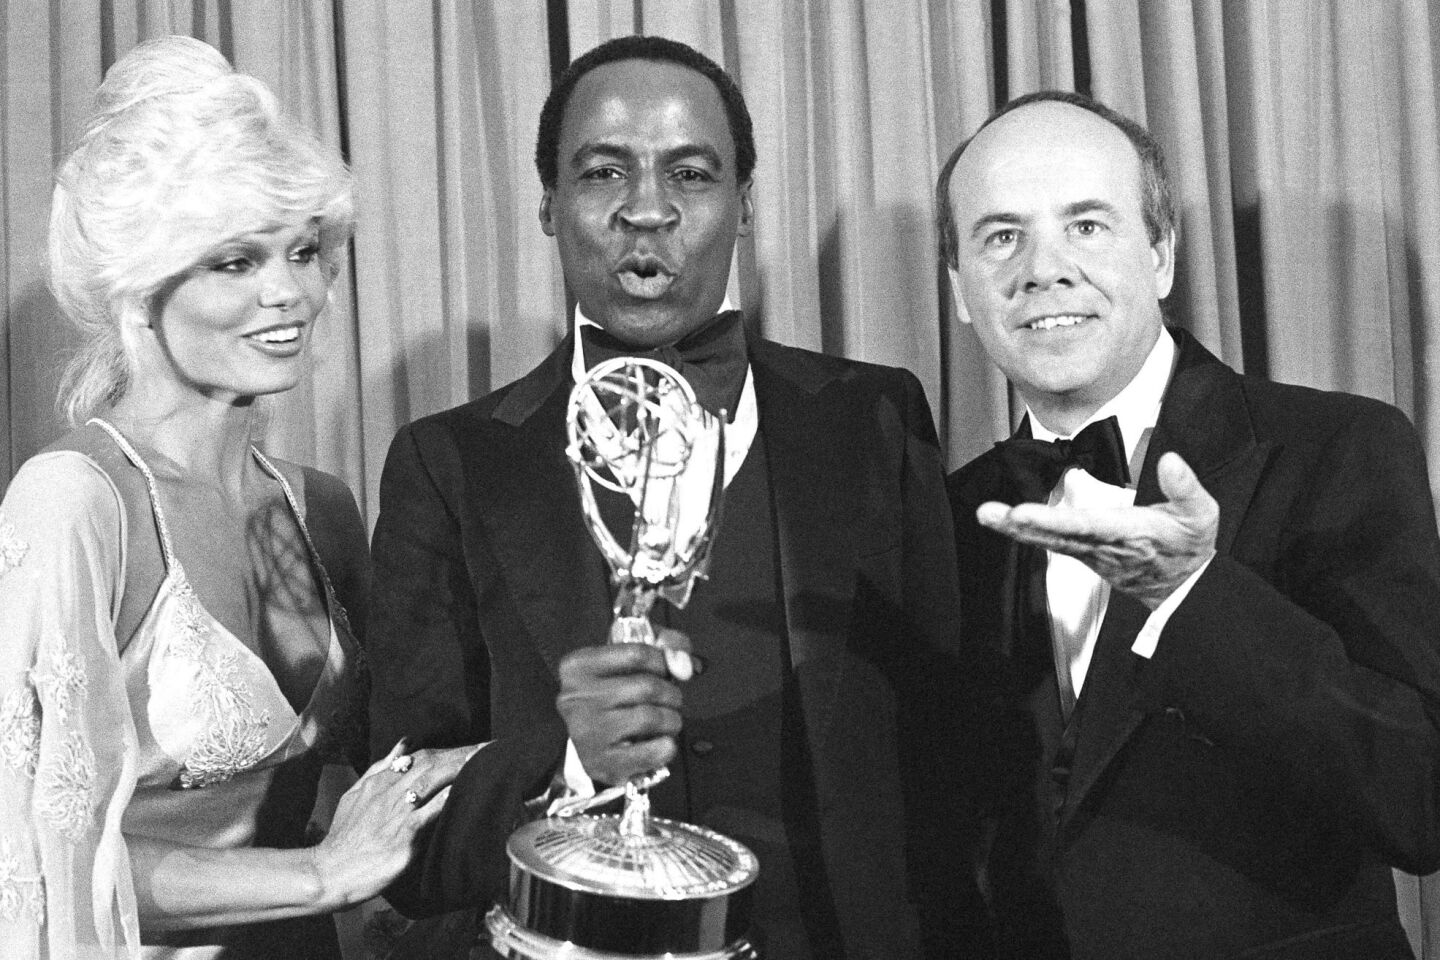 Robert Guillaume: Career in pictures